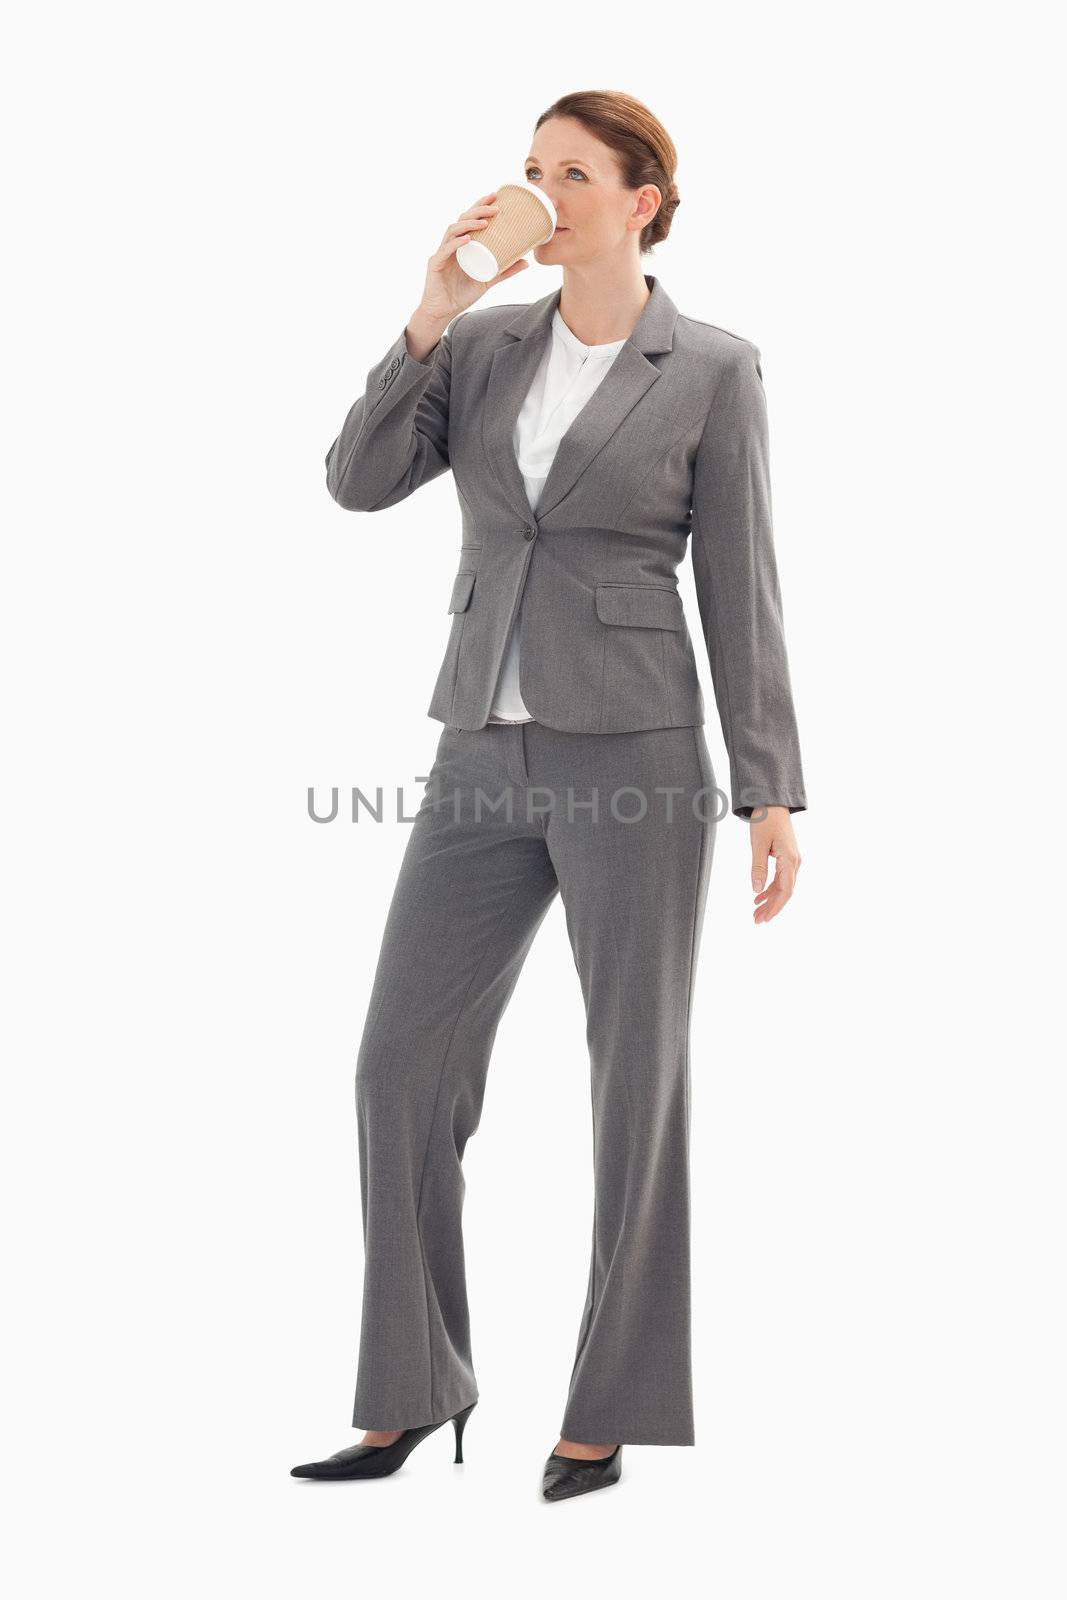 A businesswoman is drinking coffee